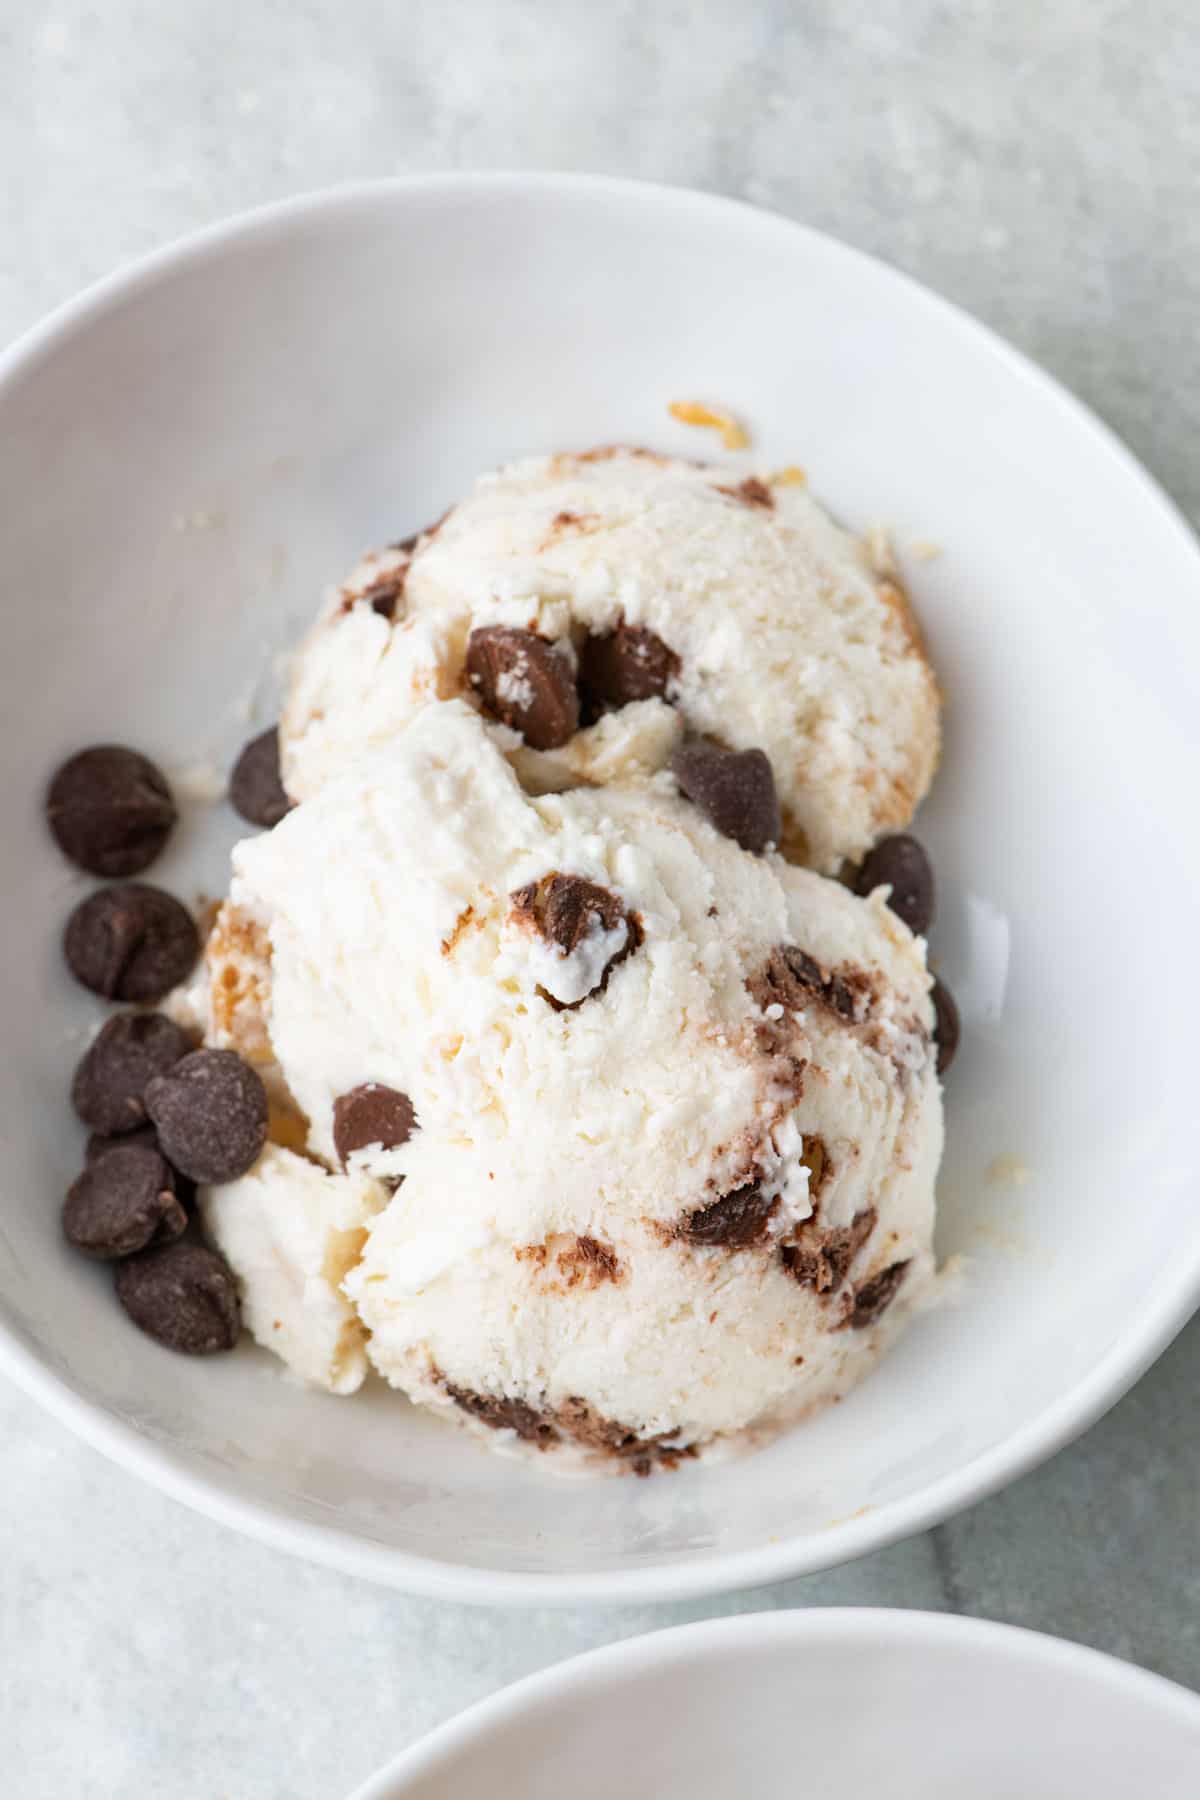 Peanut butter chocolate chip cottage cheese ice crea, in a bowl.